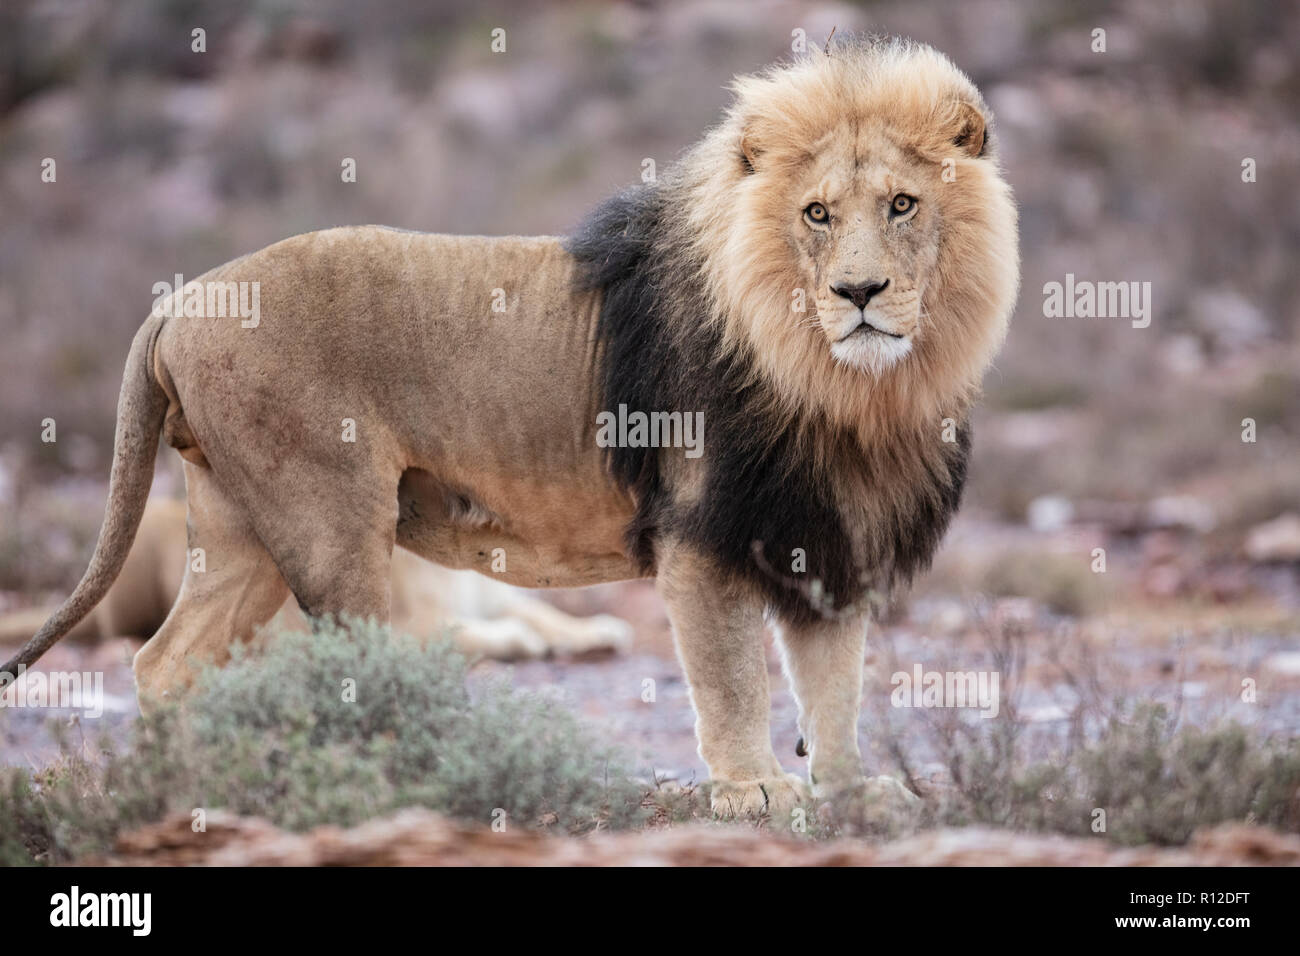 Lion (Panthera leo), Touws River, Western Cape, South Africa Stock Photo